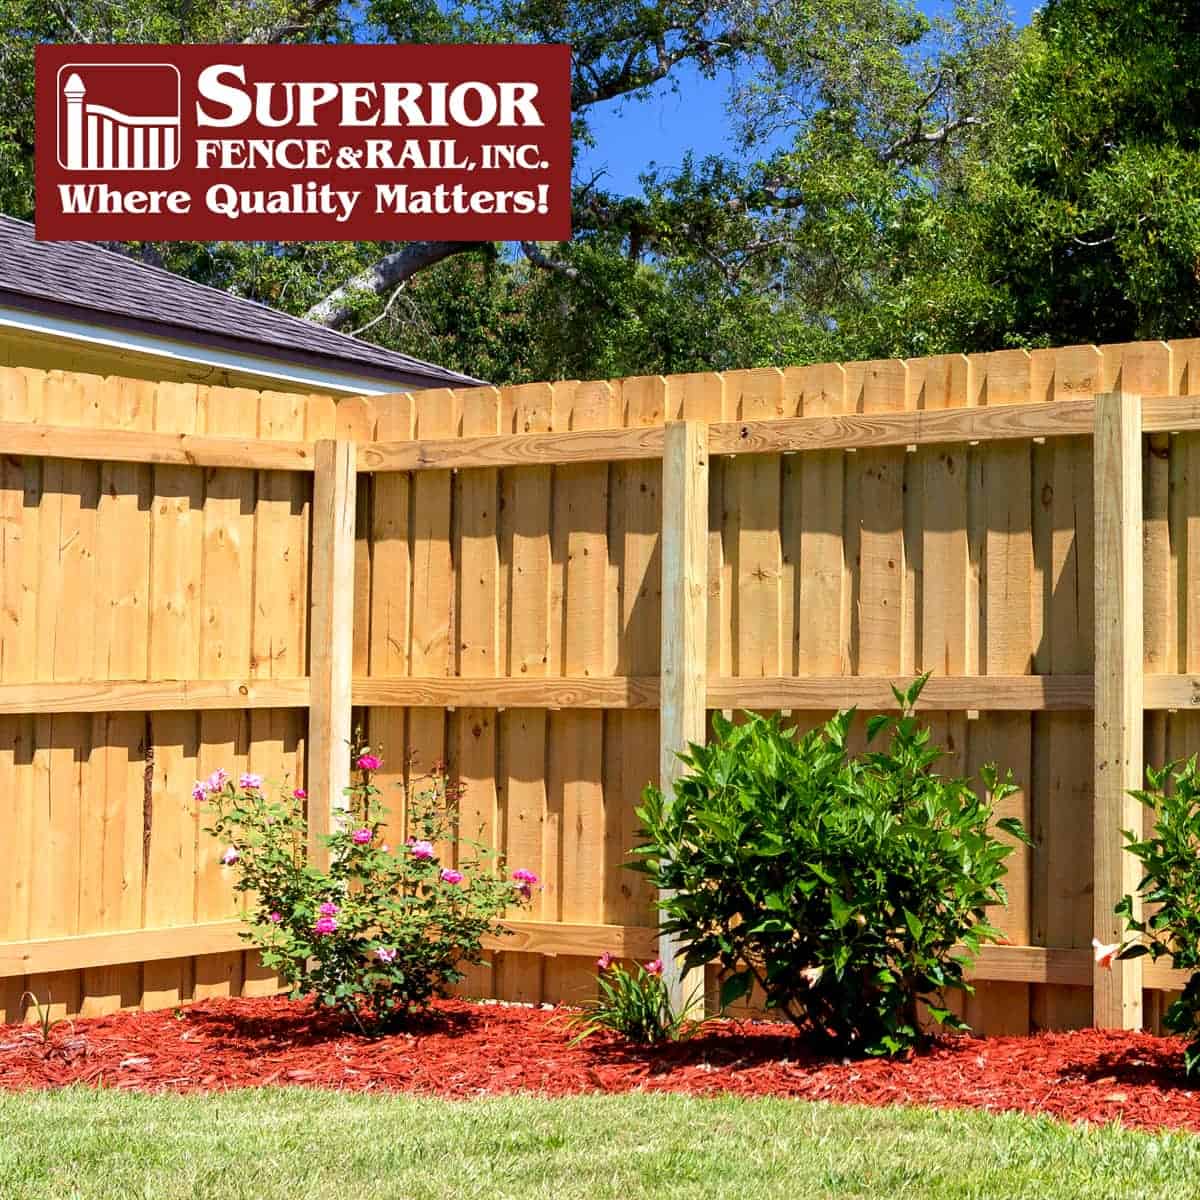 Lake Orion fence company contractor